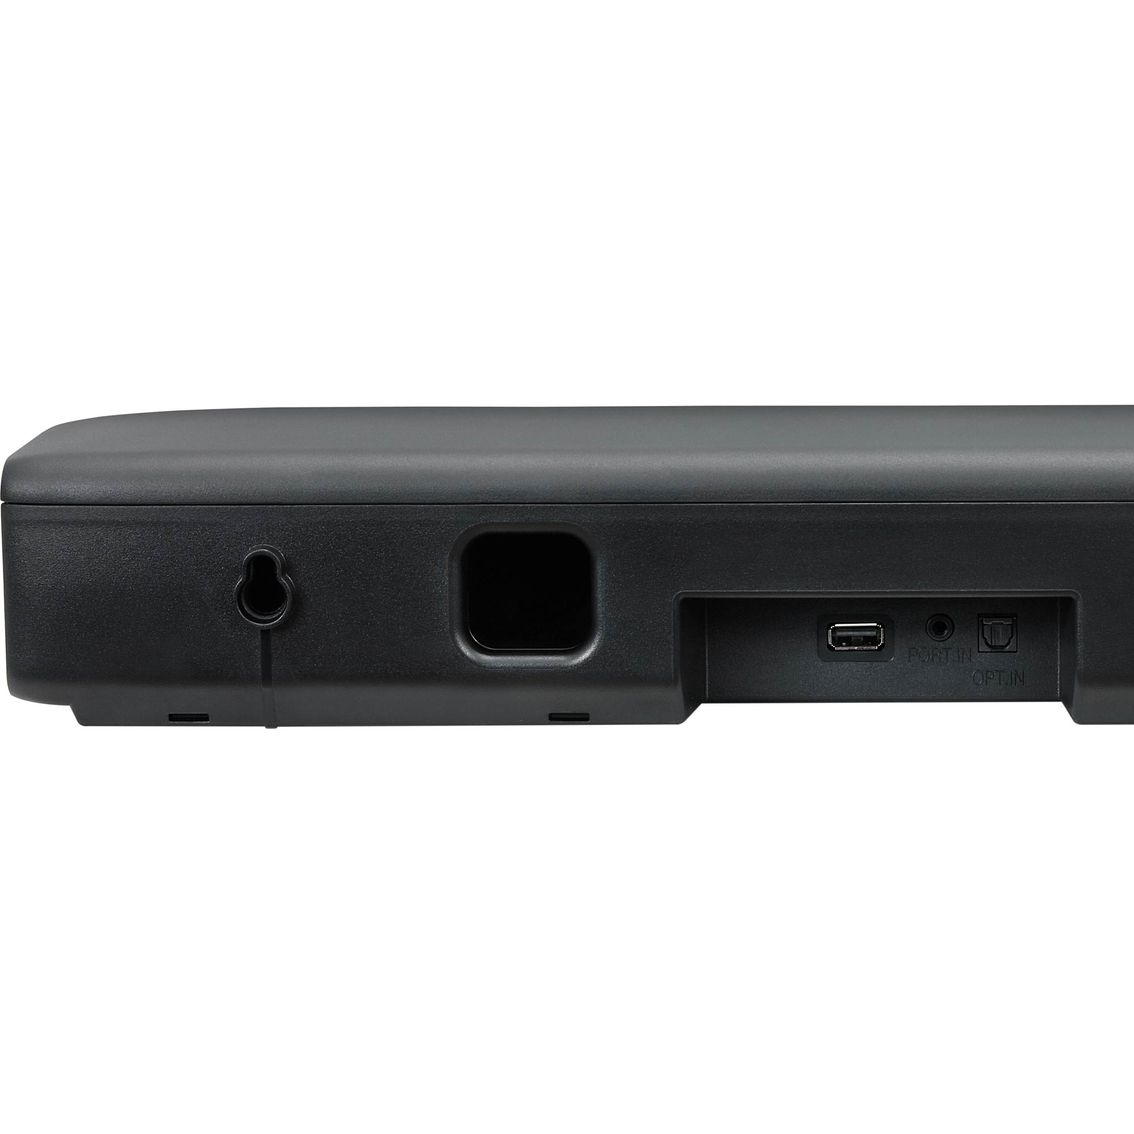 LG SK1 2.0 Channel Compact Sound Bar with Bluetooth Connectivity - Image 8 of 8